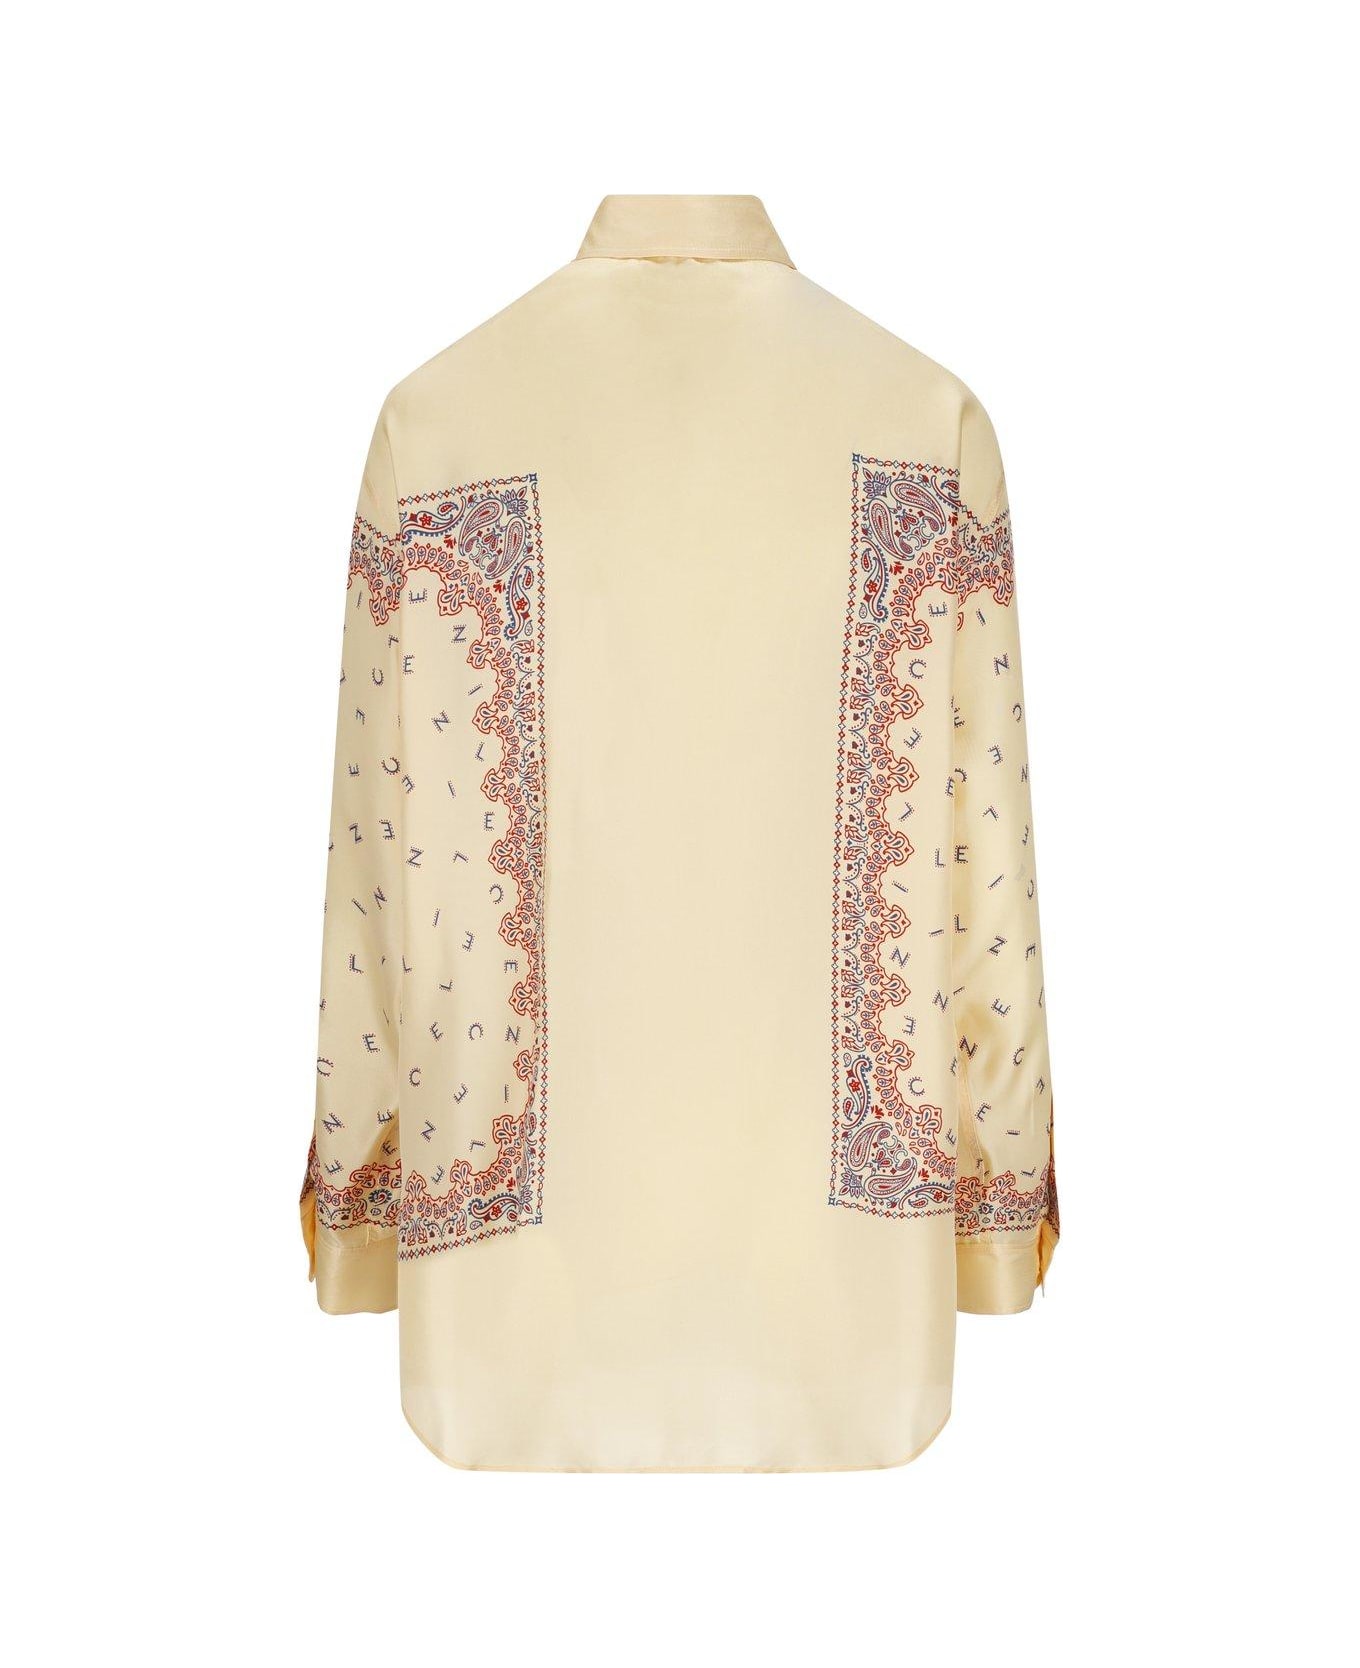 Celine Paisley Printed Buttoned Shirt